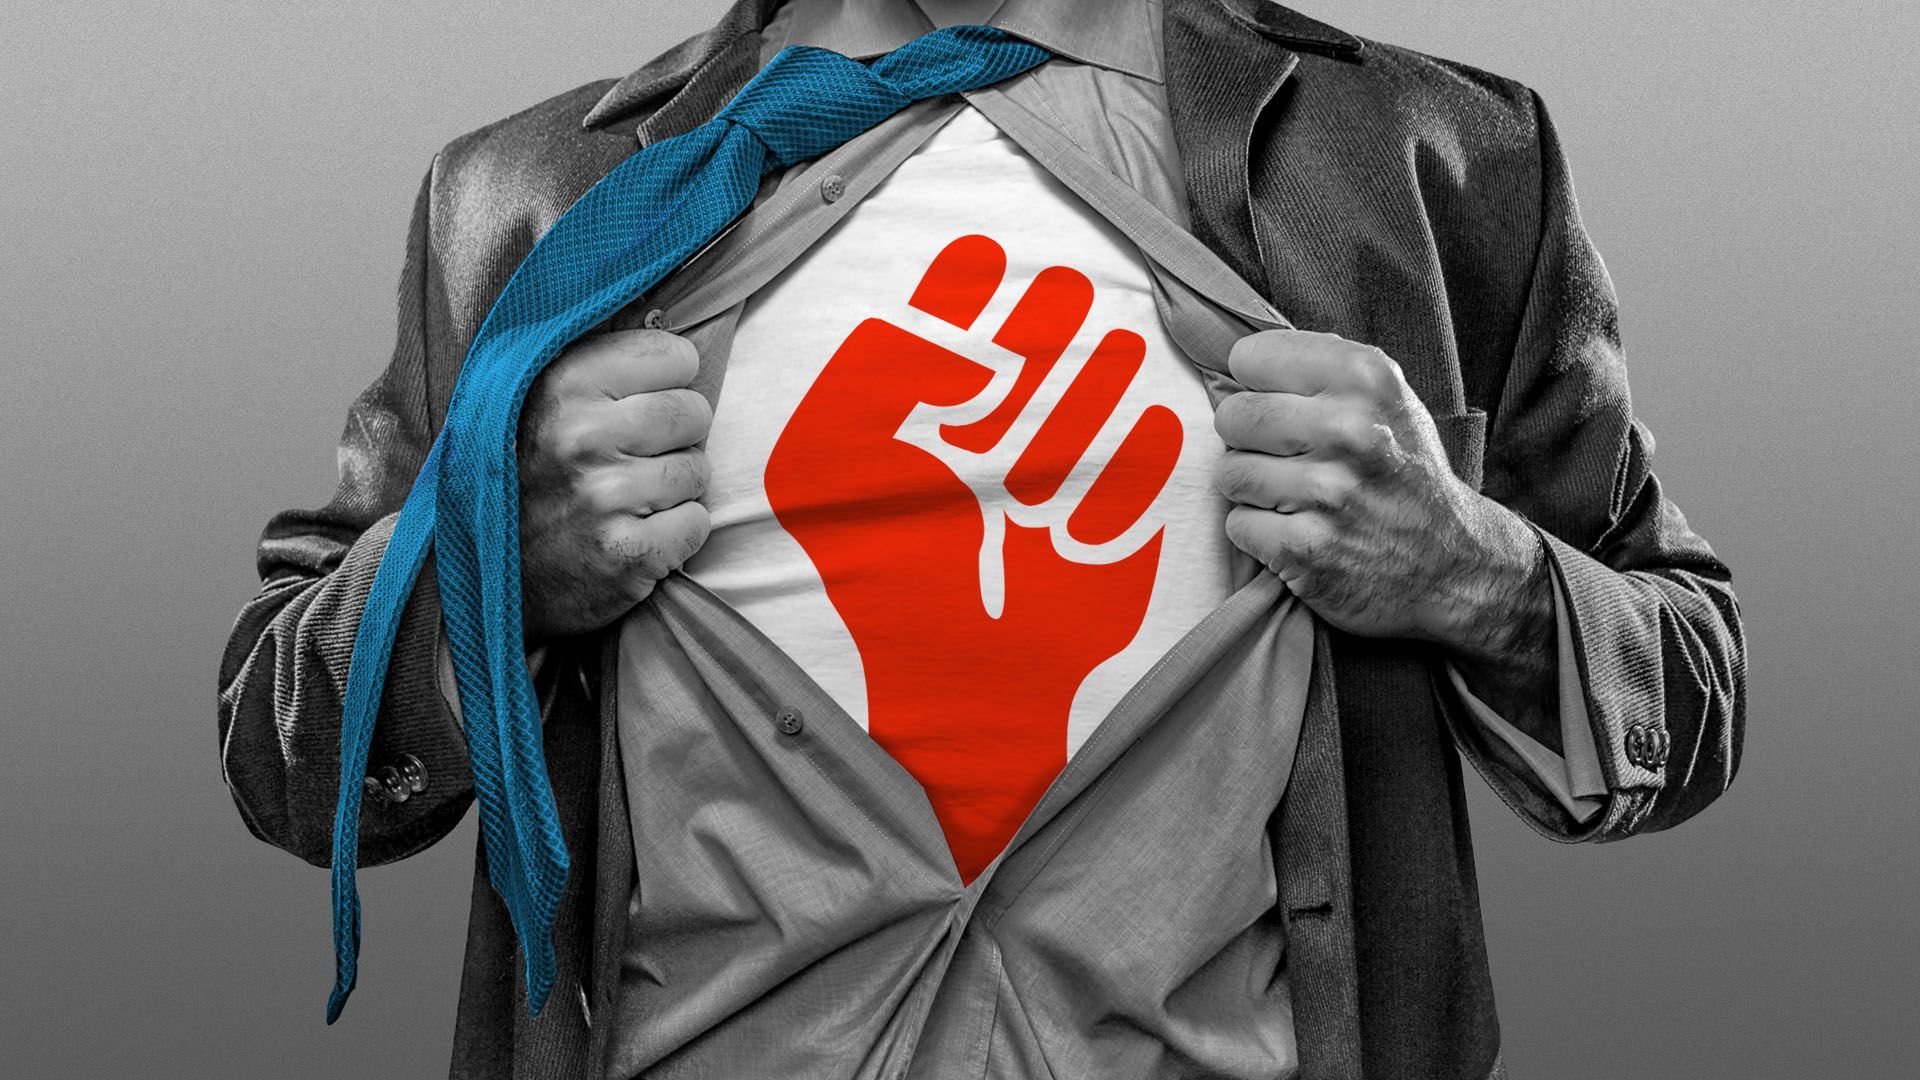 Illustration of a man tearing open a suit like superman to reveal a raised progressive fist symbol beneath